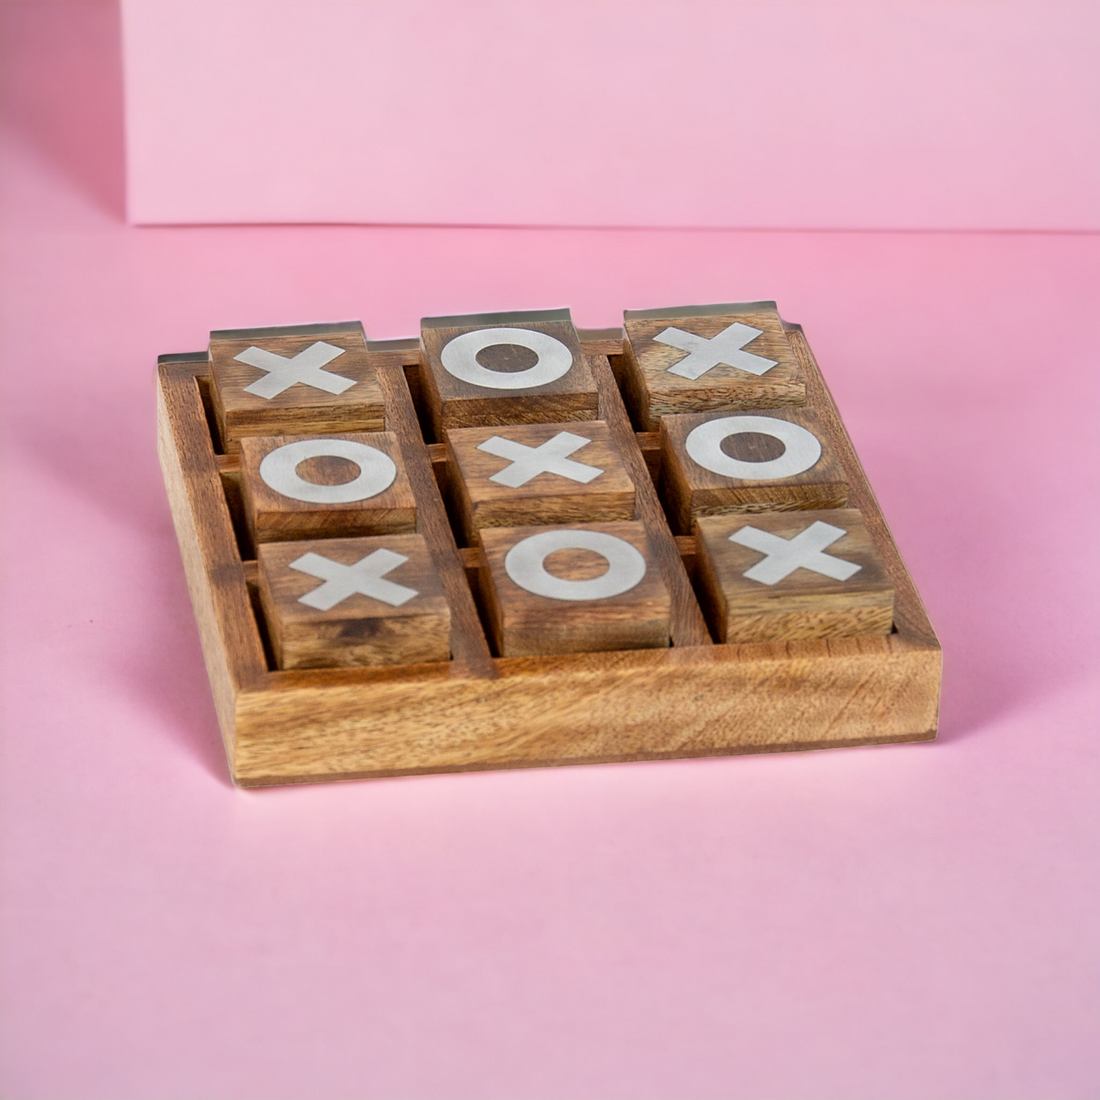 Vintage Charm Noughts and Crosses Set